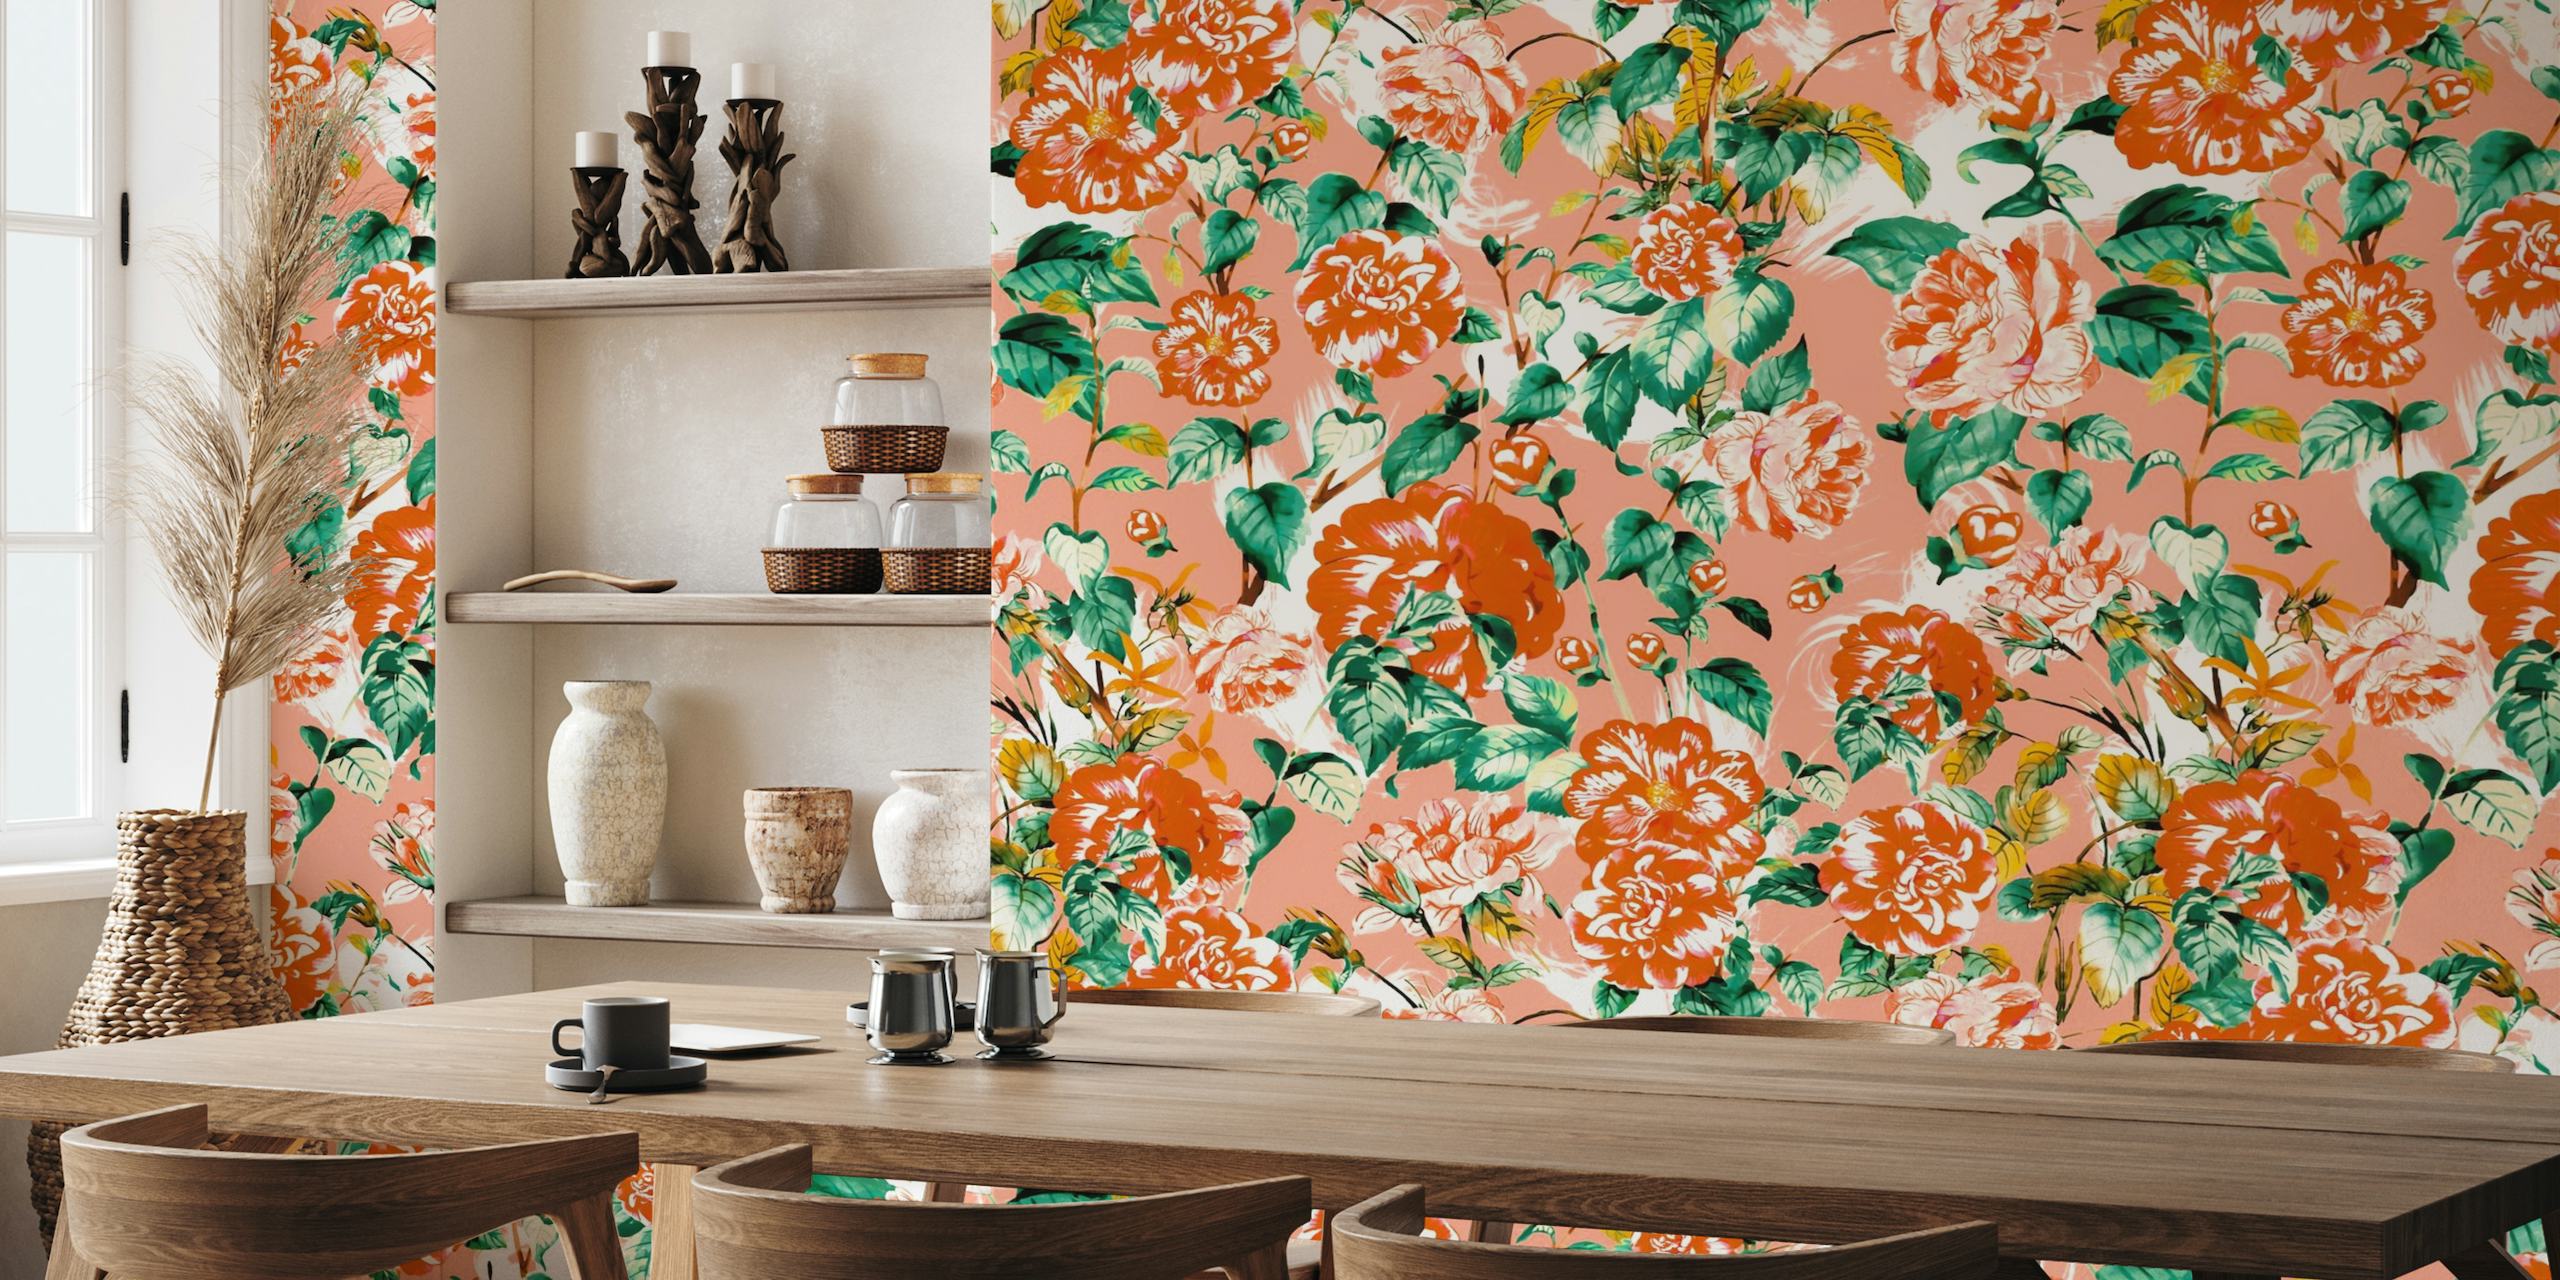 Floral wall mural with coral background and vibrant green foliage